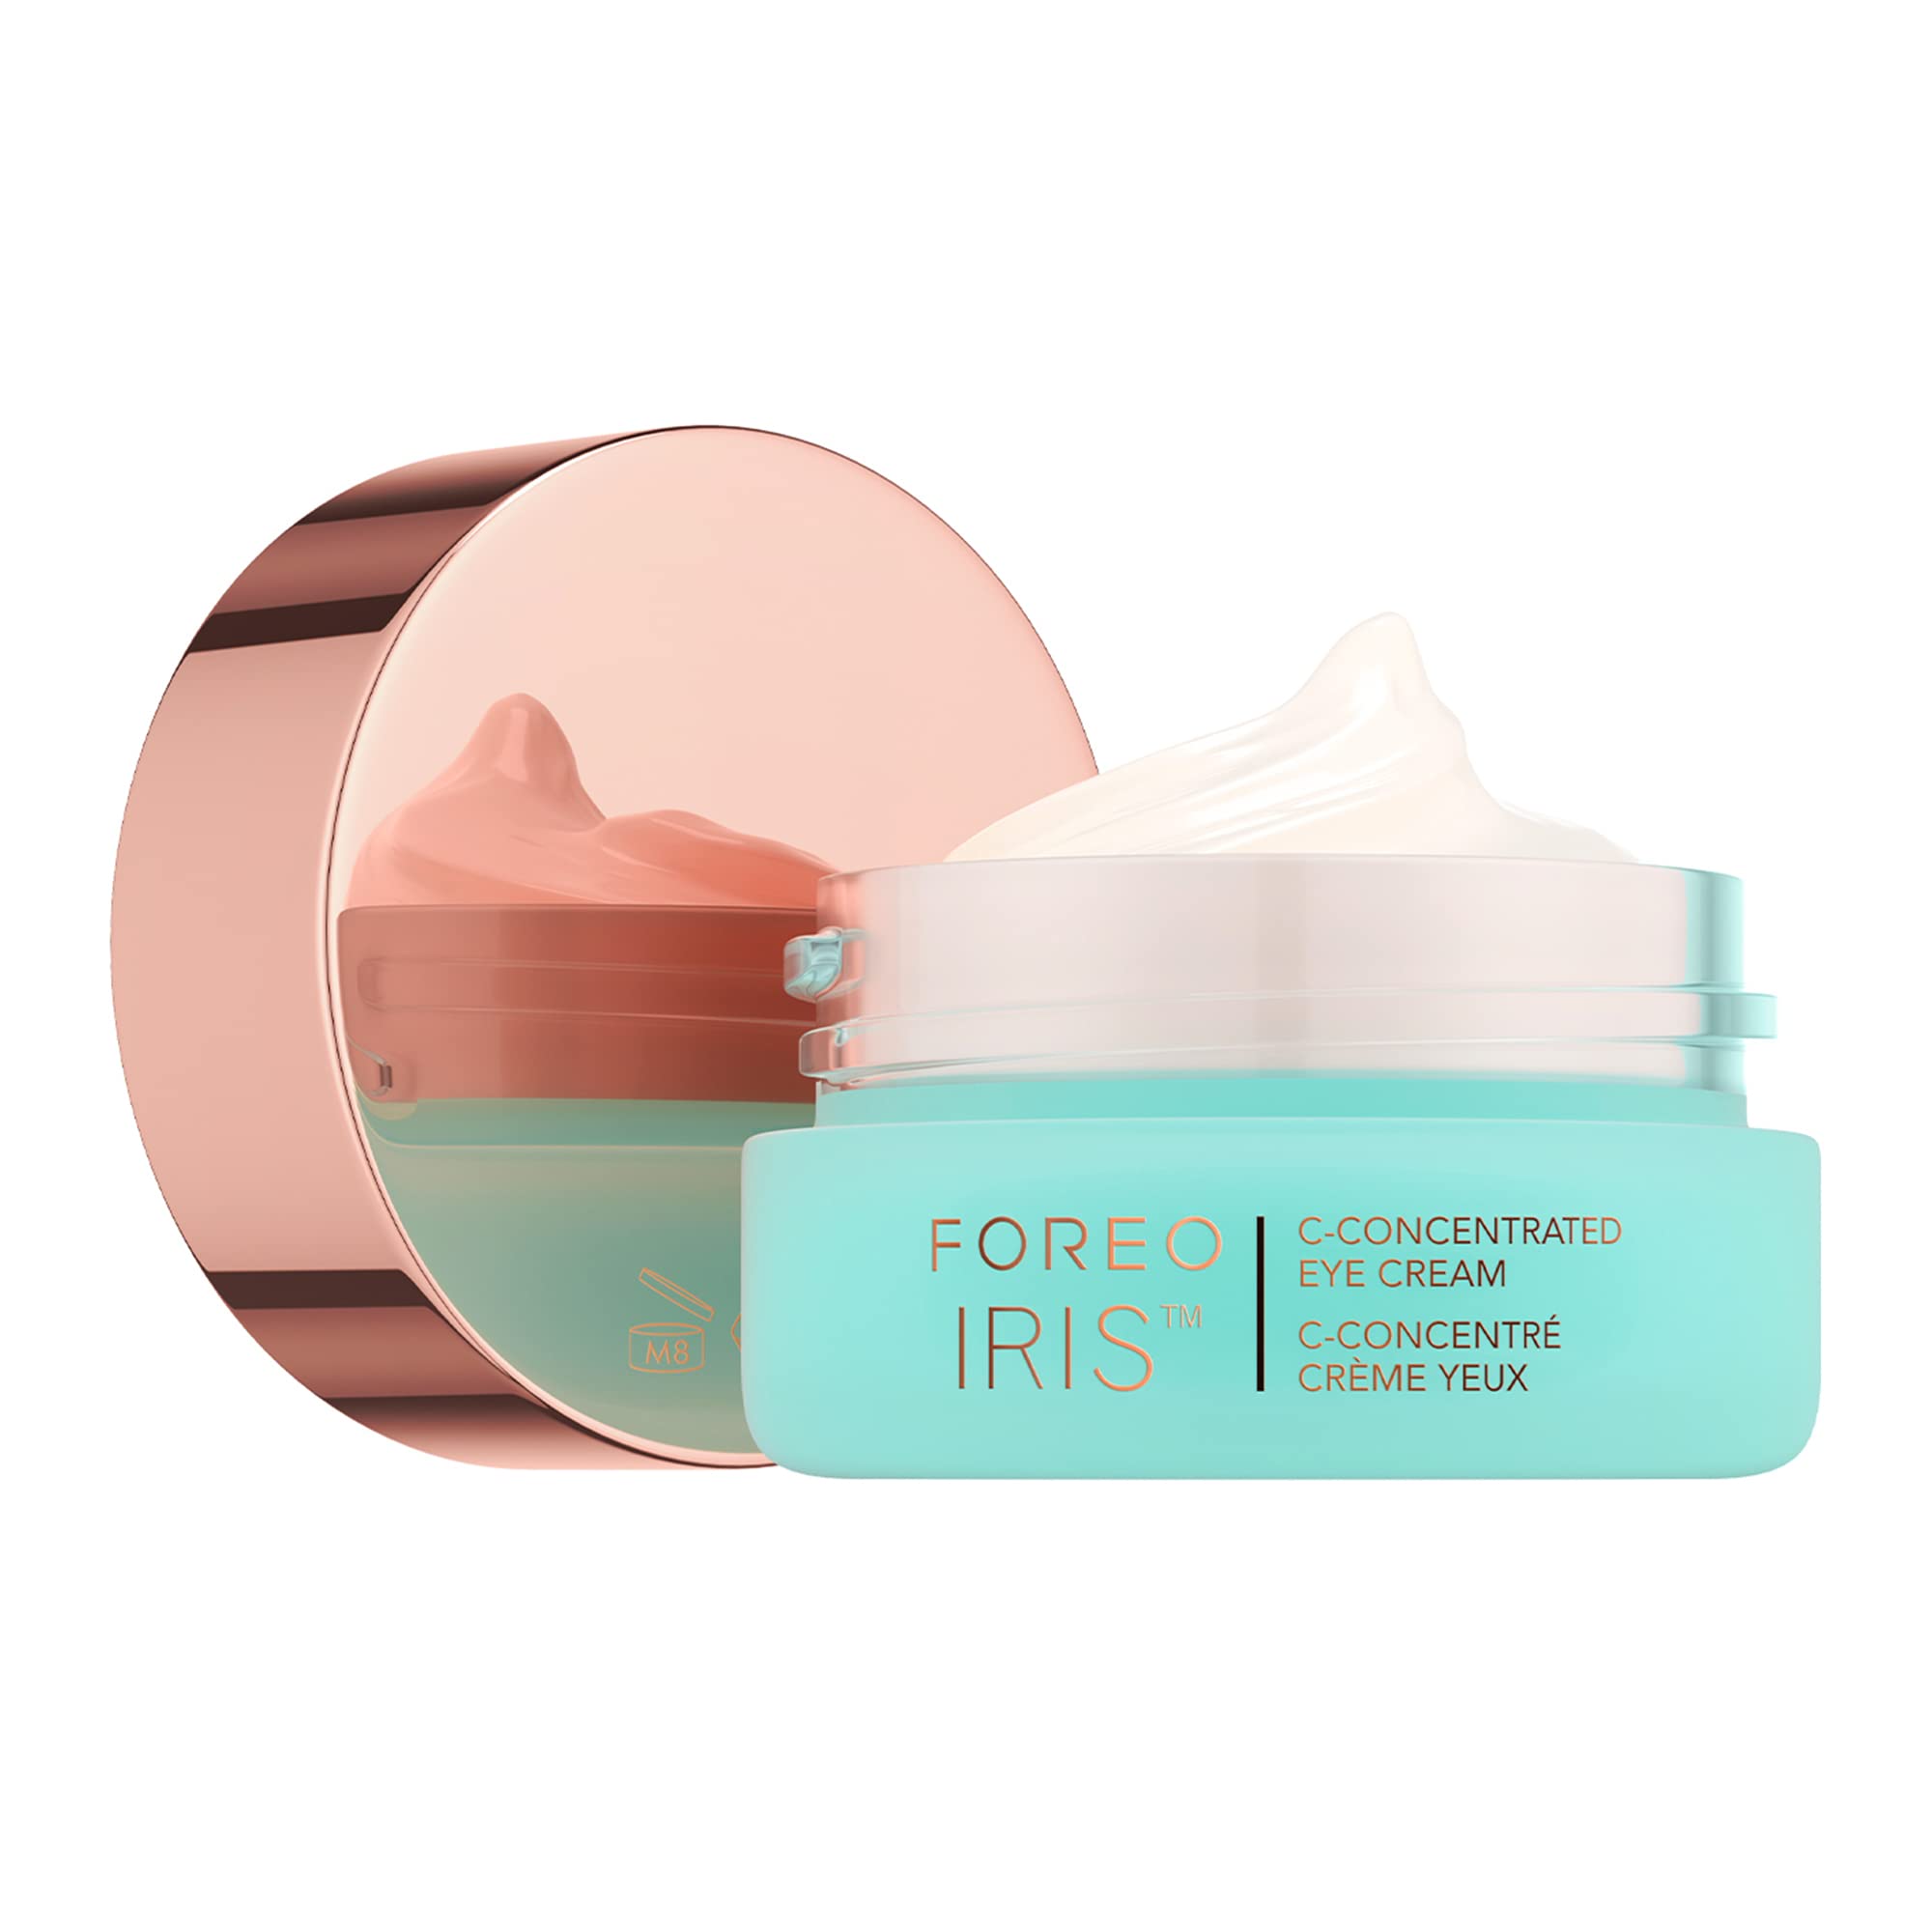 FOREO IRIS C-Concentrated Brightening Eye Cream for Dark Circles and Puffiness - Under Eye Brightener - Hyaluronic Acid - Antioxidant - Vegan - Travel Size - All Skin Types - 0.5 oz